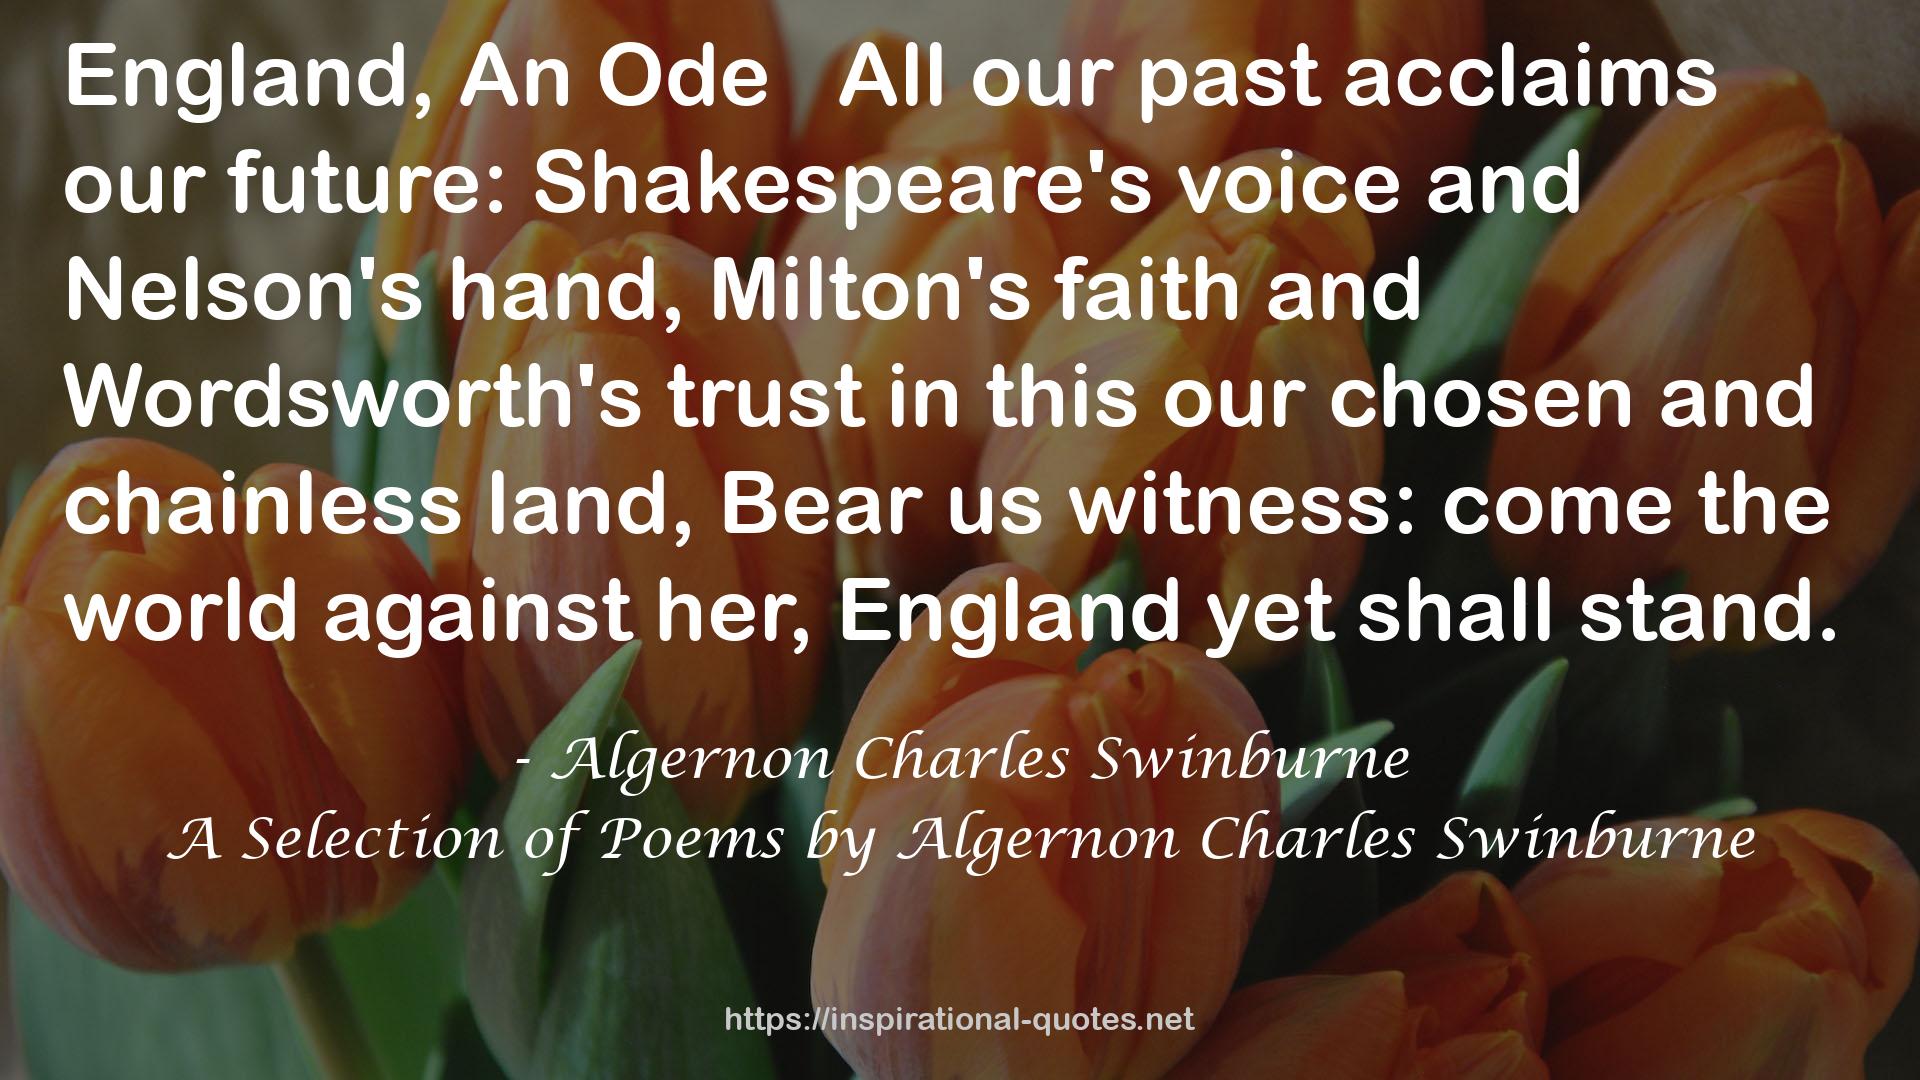 A Selection of Poems by Algernon Charles Swinburne QUOTES